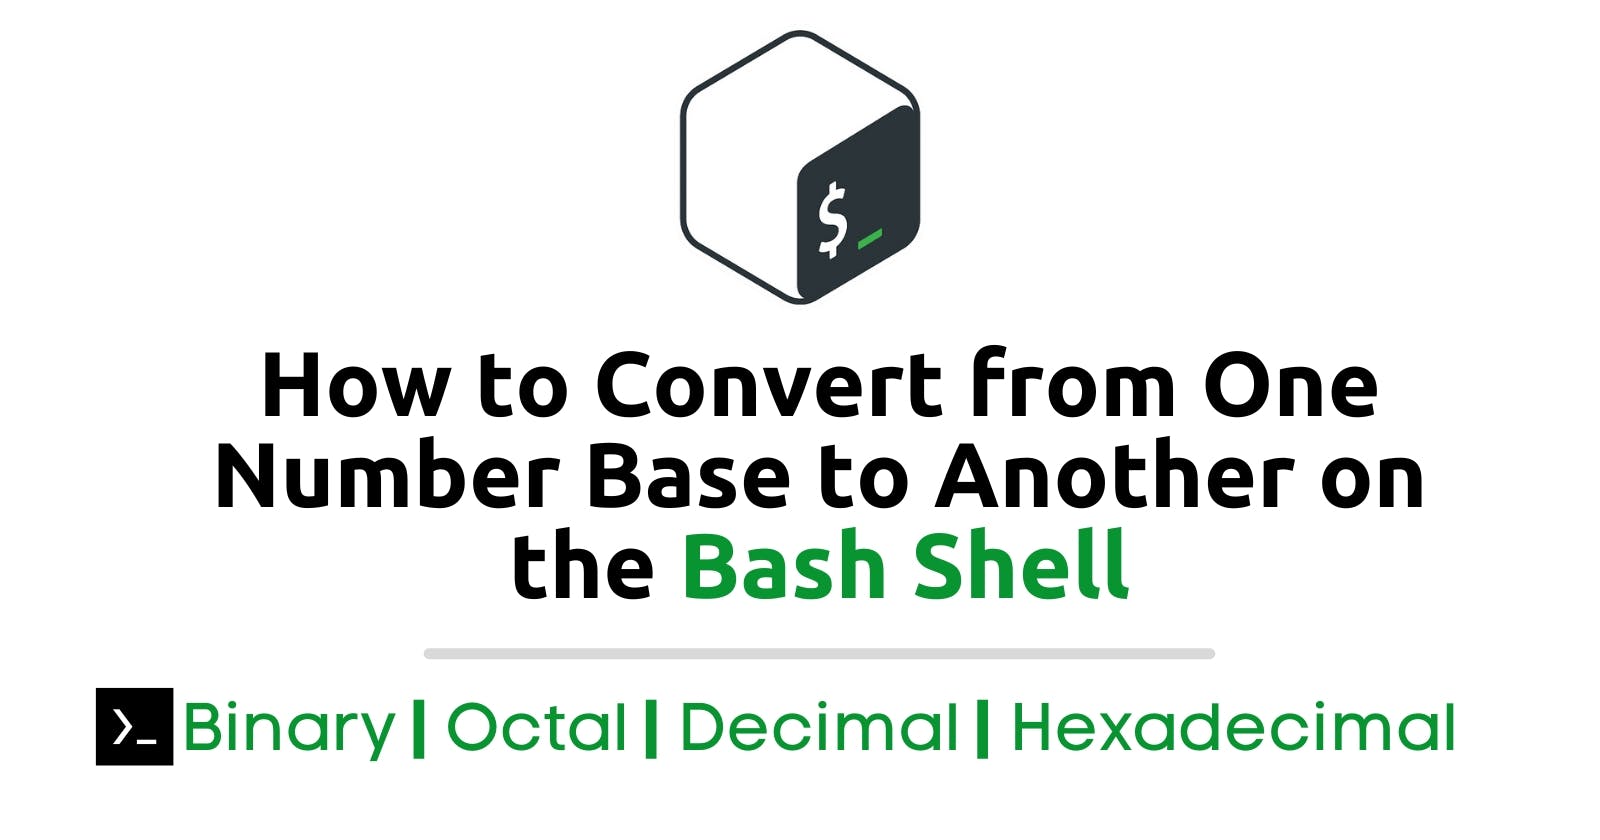 How to Convert from Other Bases to Decimal and from Decimal to Octal and Hexadecimal on the Bash Shell